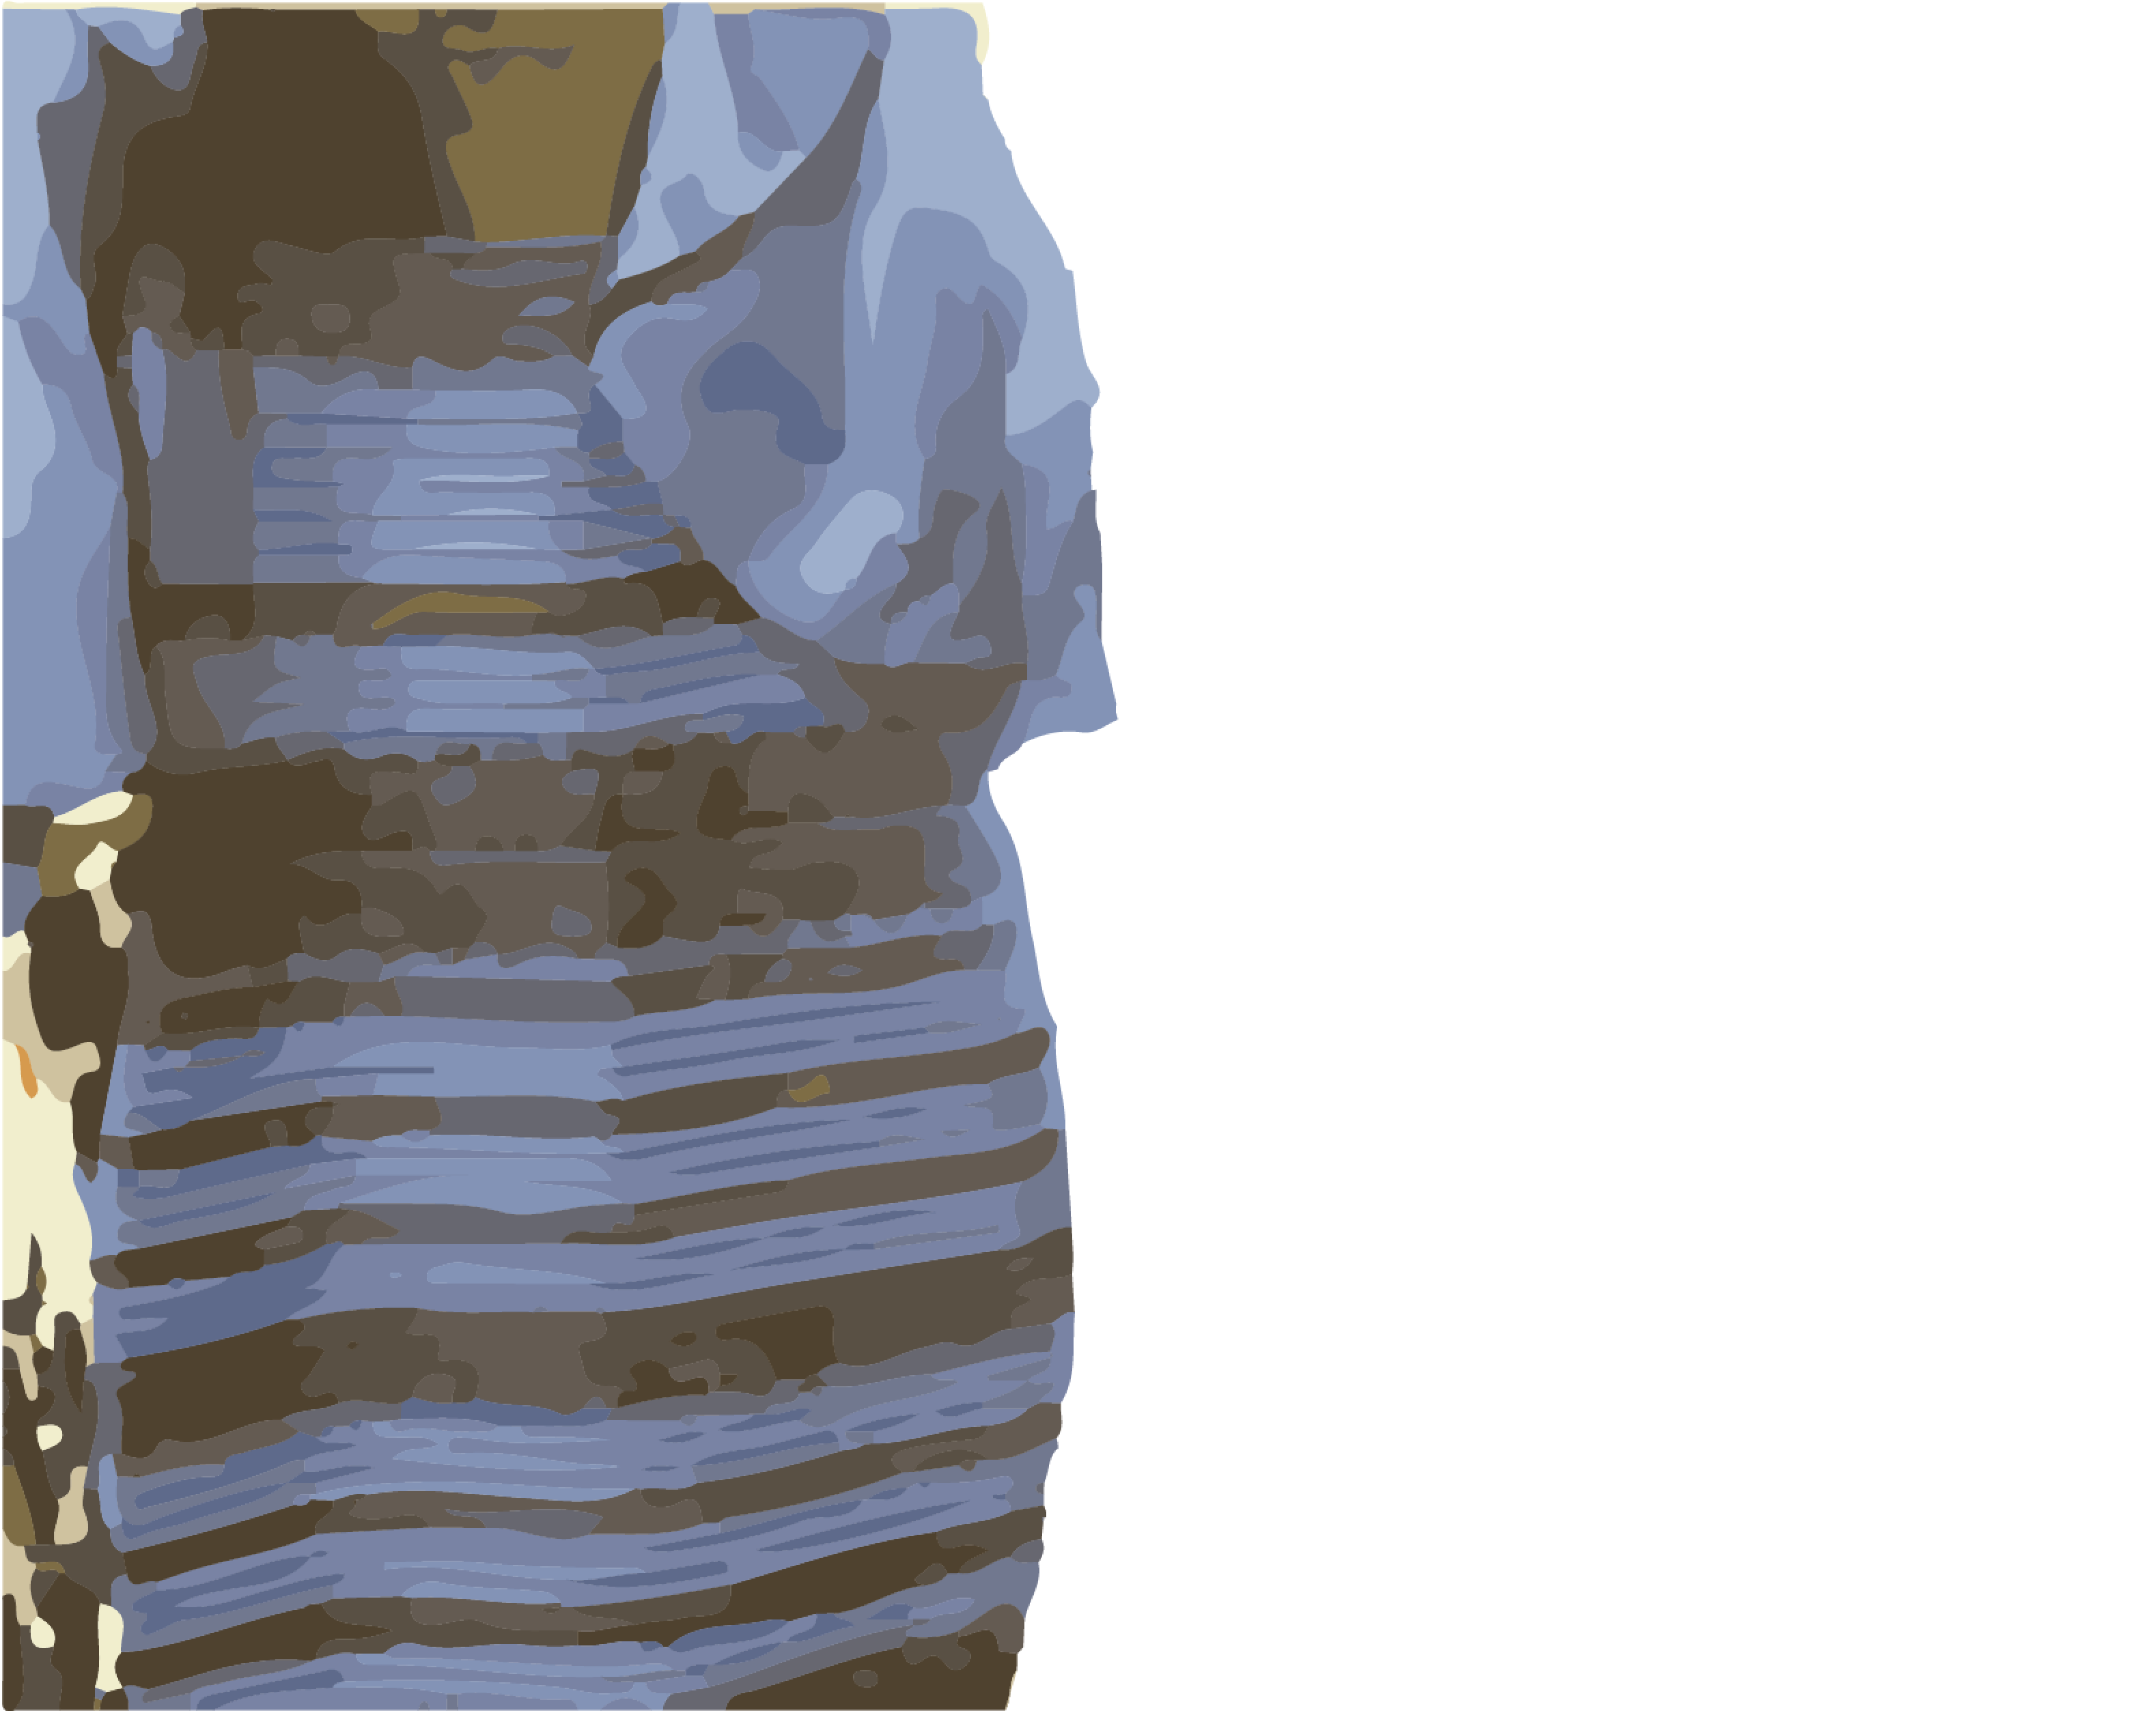 #thedress